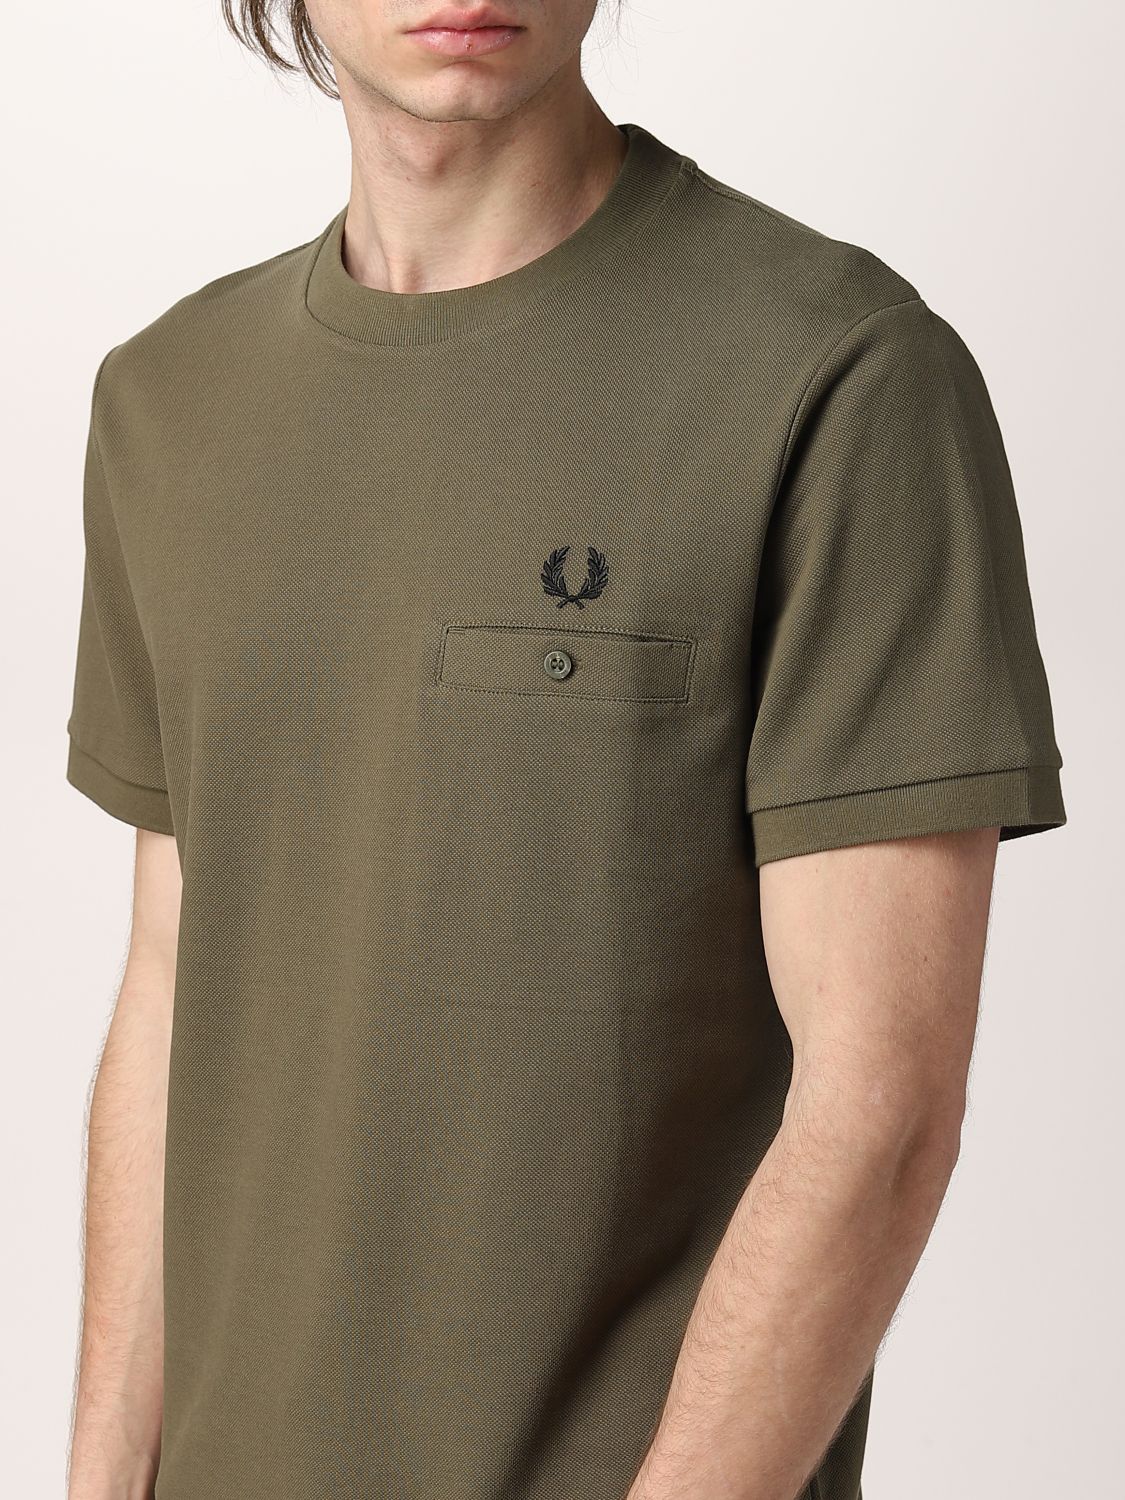 Tシャツ Fred Perry: Tシャツ メンズ Fred Perry ミリタリー 3